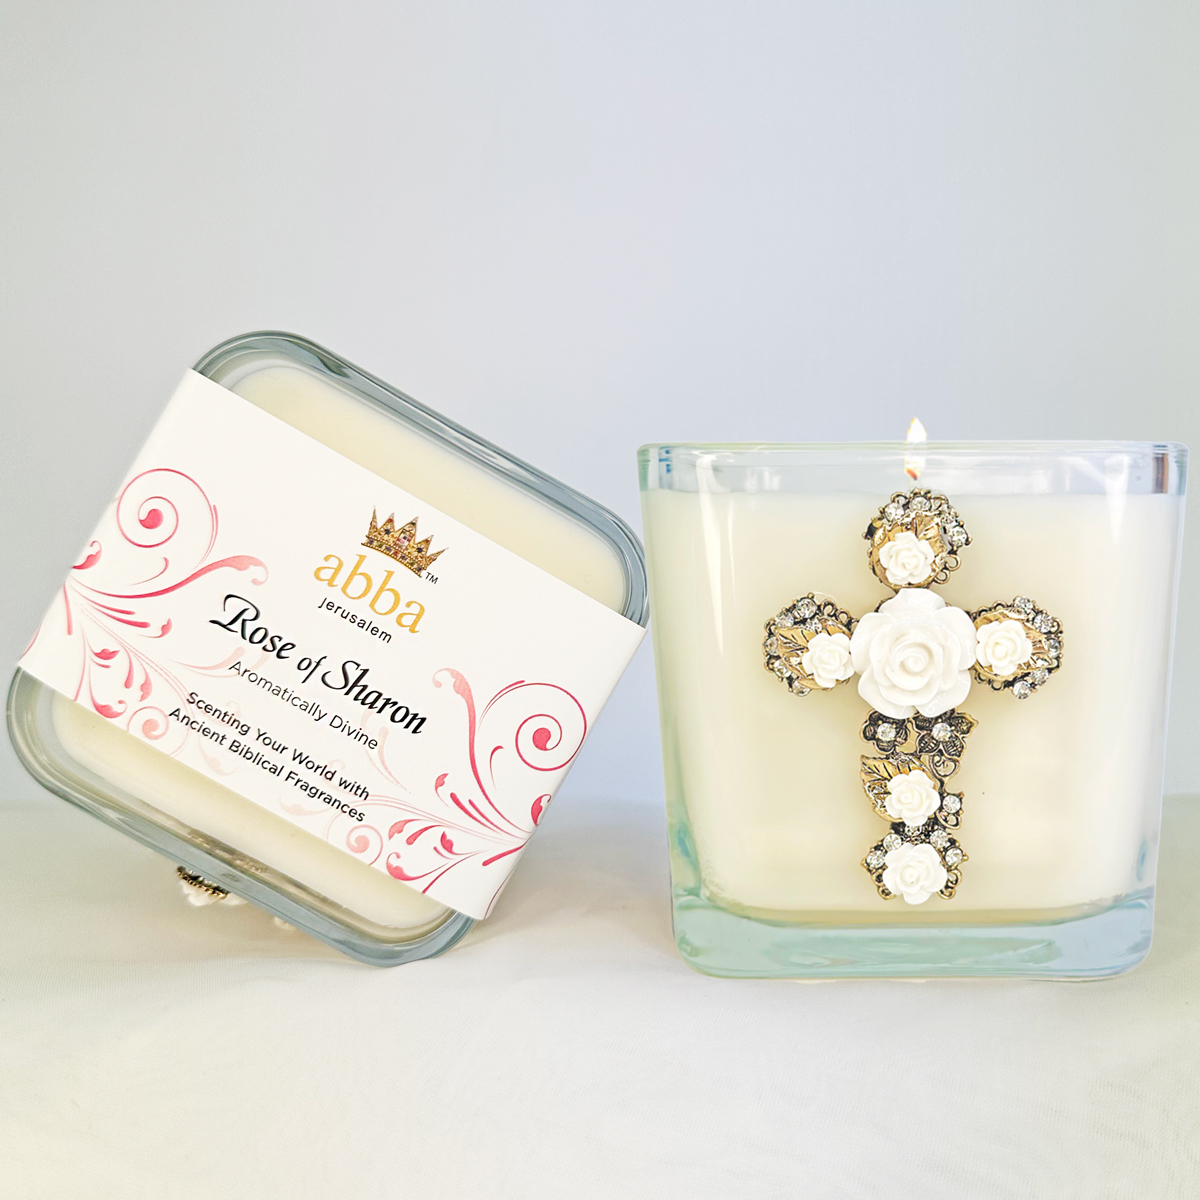 ROSE JEWELED CROSS CANDLE W/ WHITE ROSES